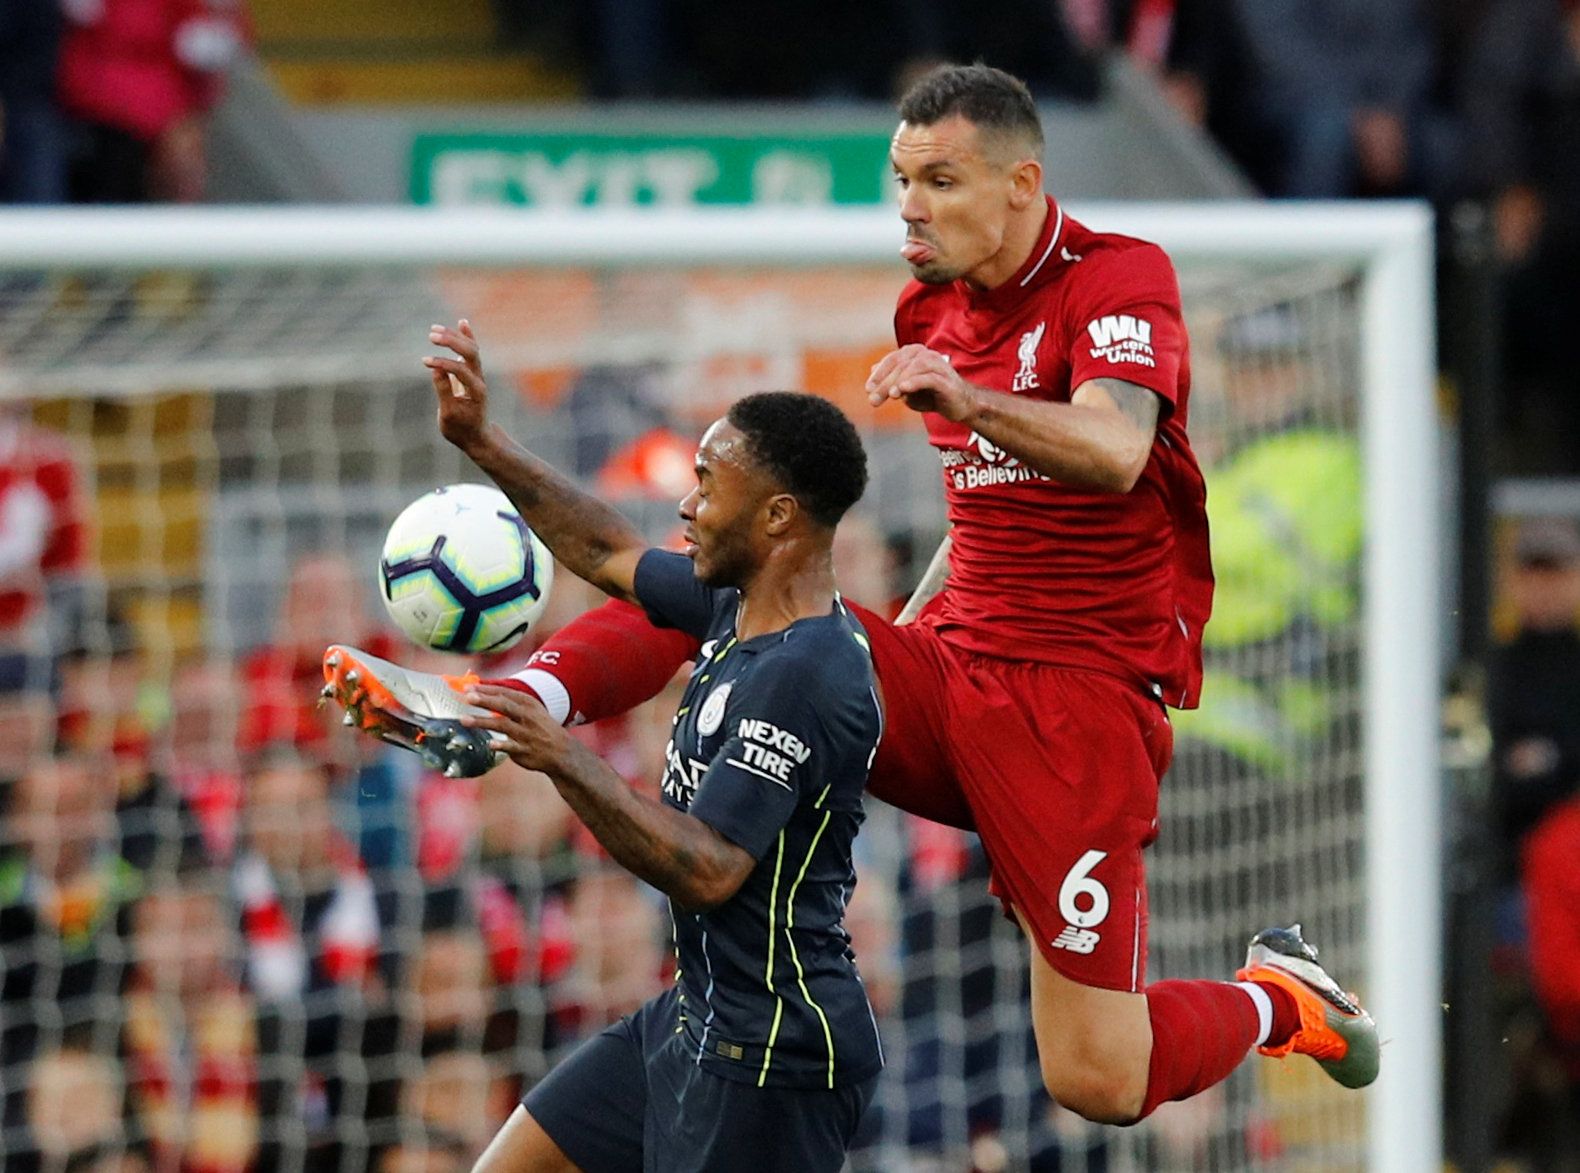 Soccer Football - Premier League - Liverpool v Manchester City - Anfield, Liverpool, Britain - October 7, 2018  Manchester City's Raheem Sterling in action with Liverpool's Dejan Lovren                   REUTERS/Phil Noble  EDITORIAL USE ONLY. No use with unauthorized audio, video, data, fixture lists, club/league logos or 